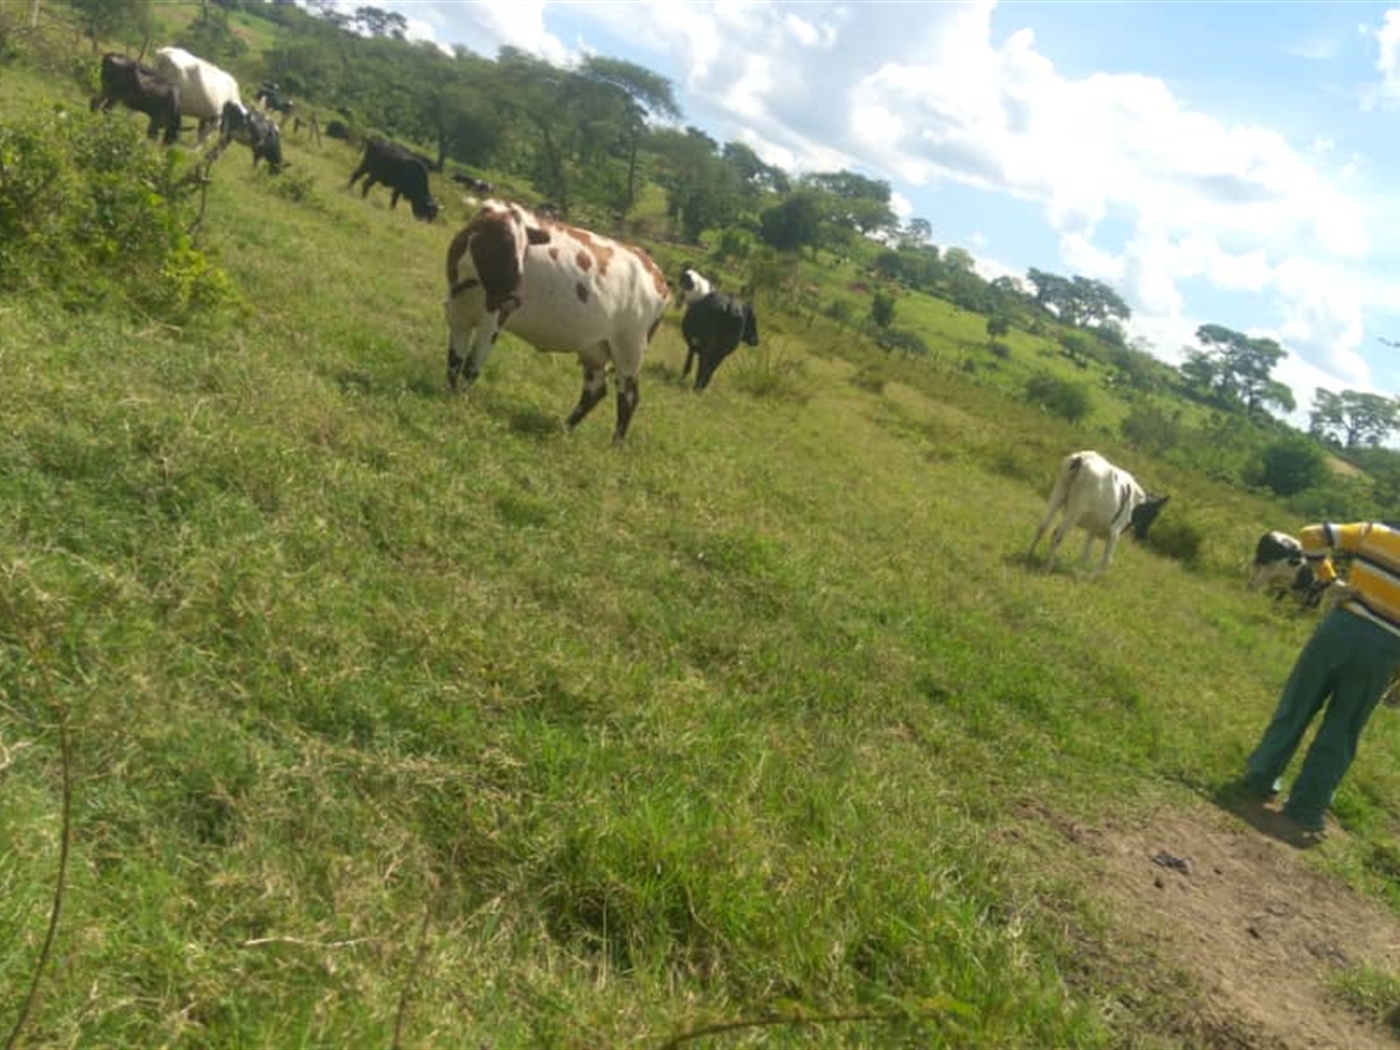 Agricultural Land for sale in Kashongi Mbarara